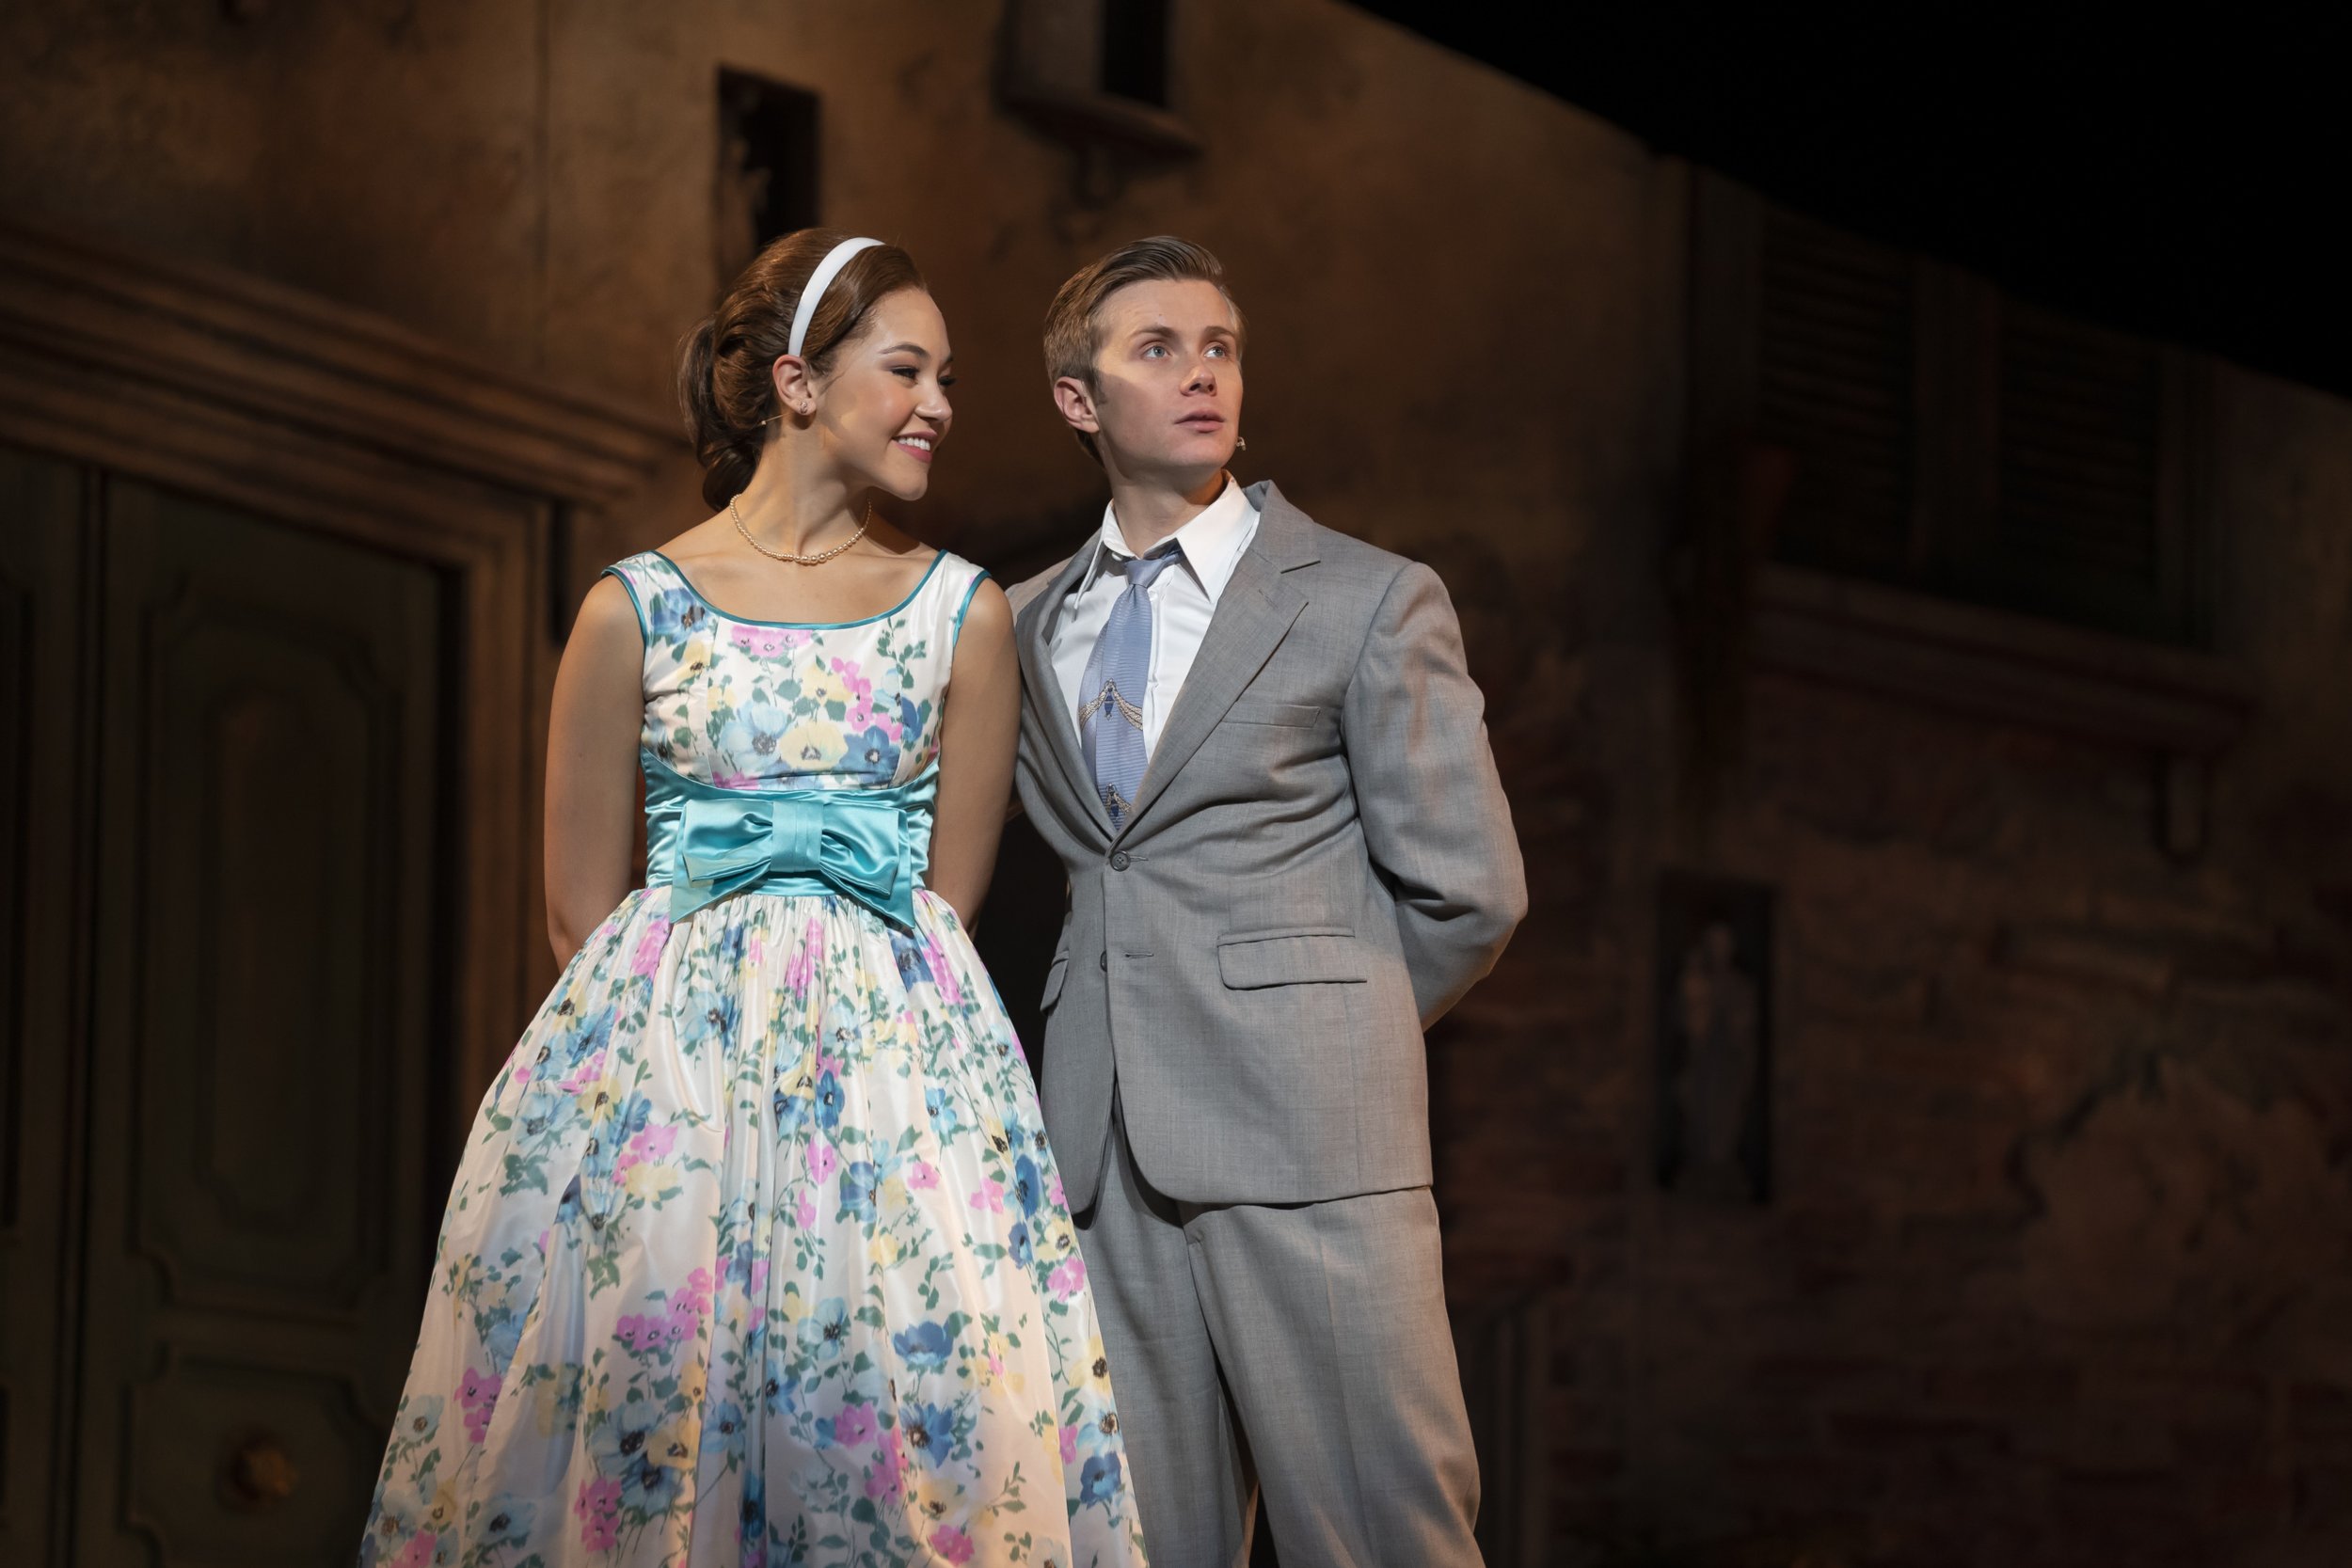 7_Solea-Pfeiffer-and-Rob-Houchen-in-the-Scenario-Two-production-of-The-Light-in-the-Piazza-at-Lyric-Opera-House_Credit-Liz-Lauren-scaled.jpeg